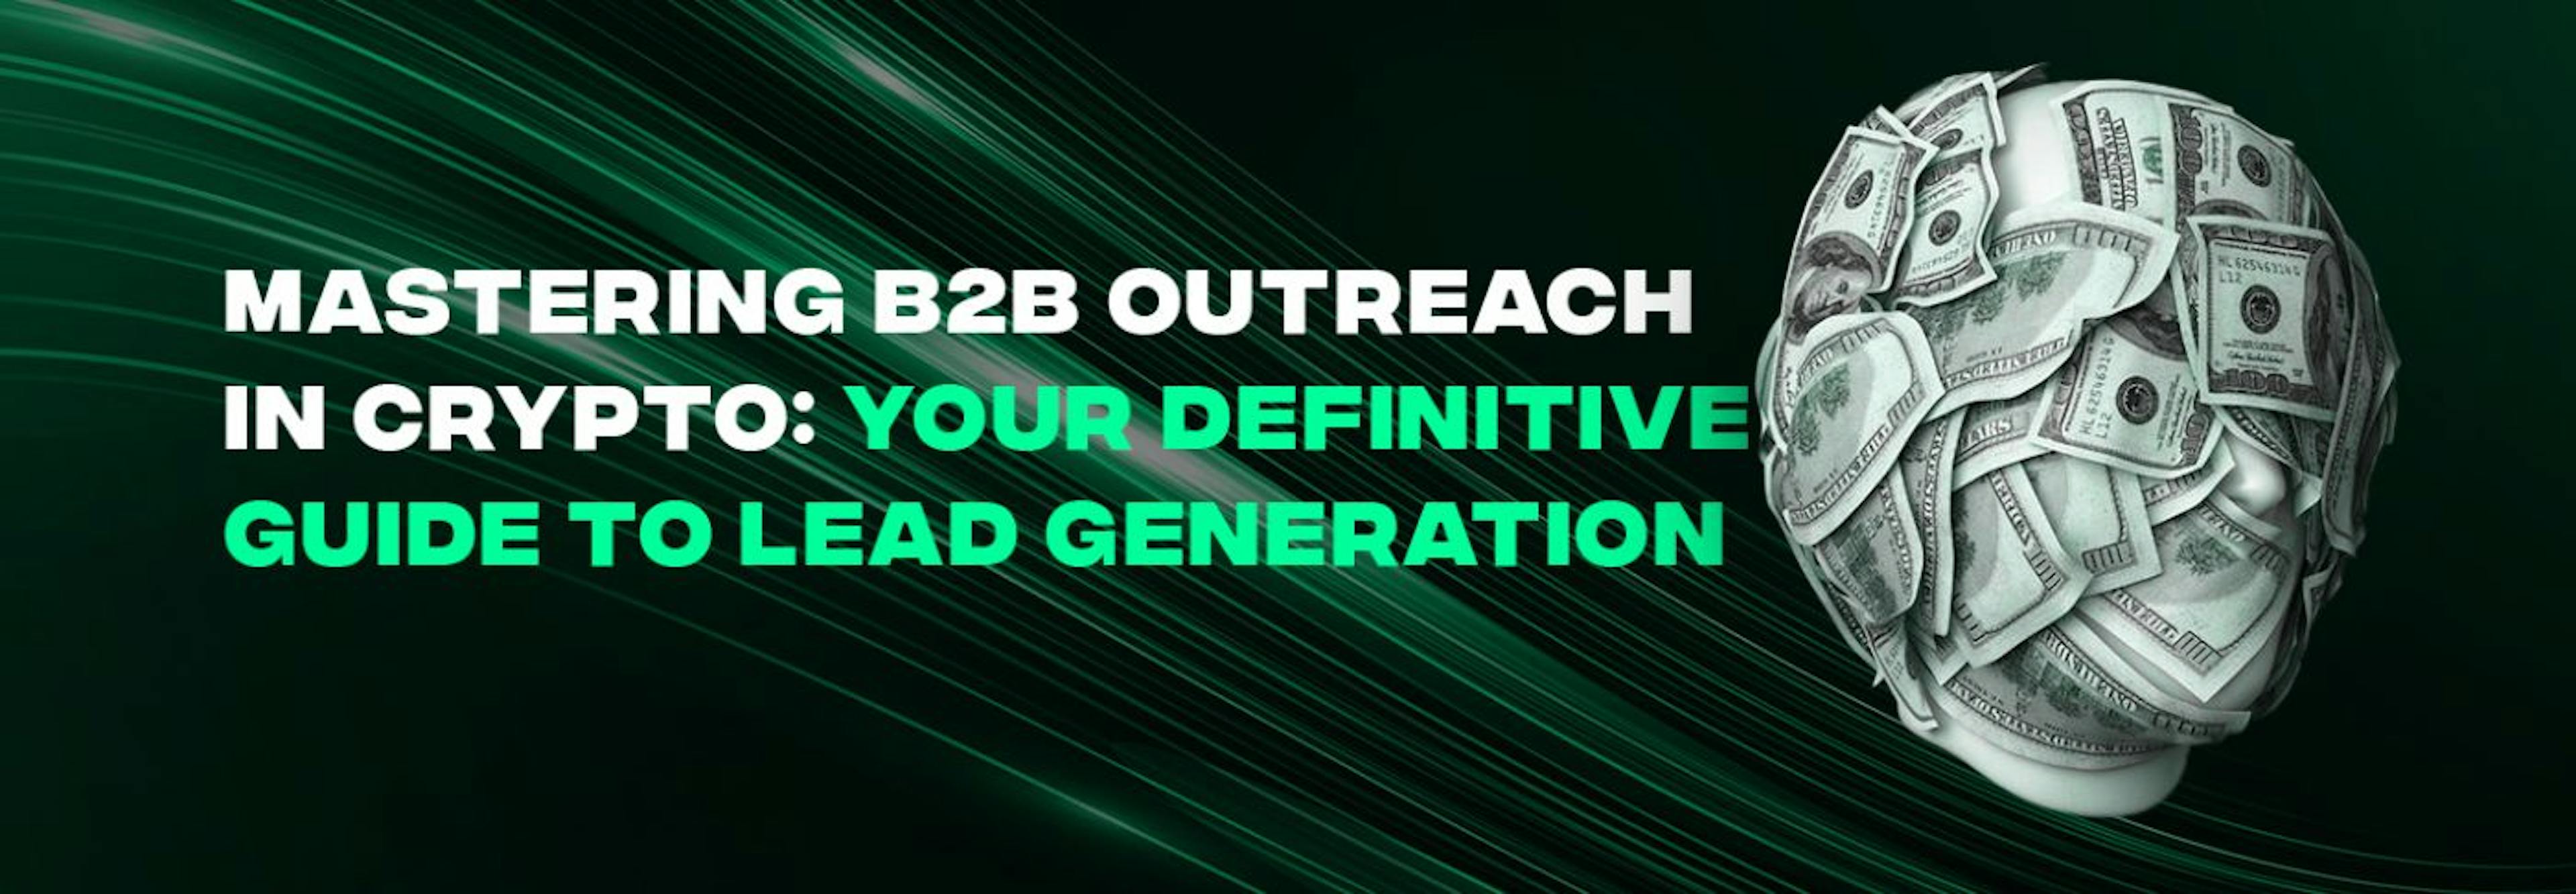 featured image - Mastering B2B Outreach in Crypto: Your Definitive Guide to Lead Generation